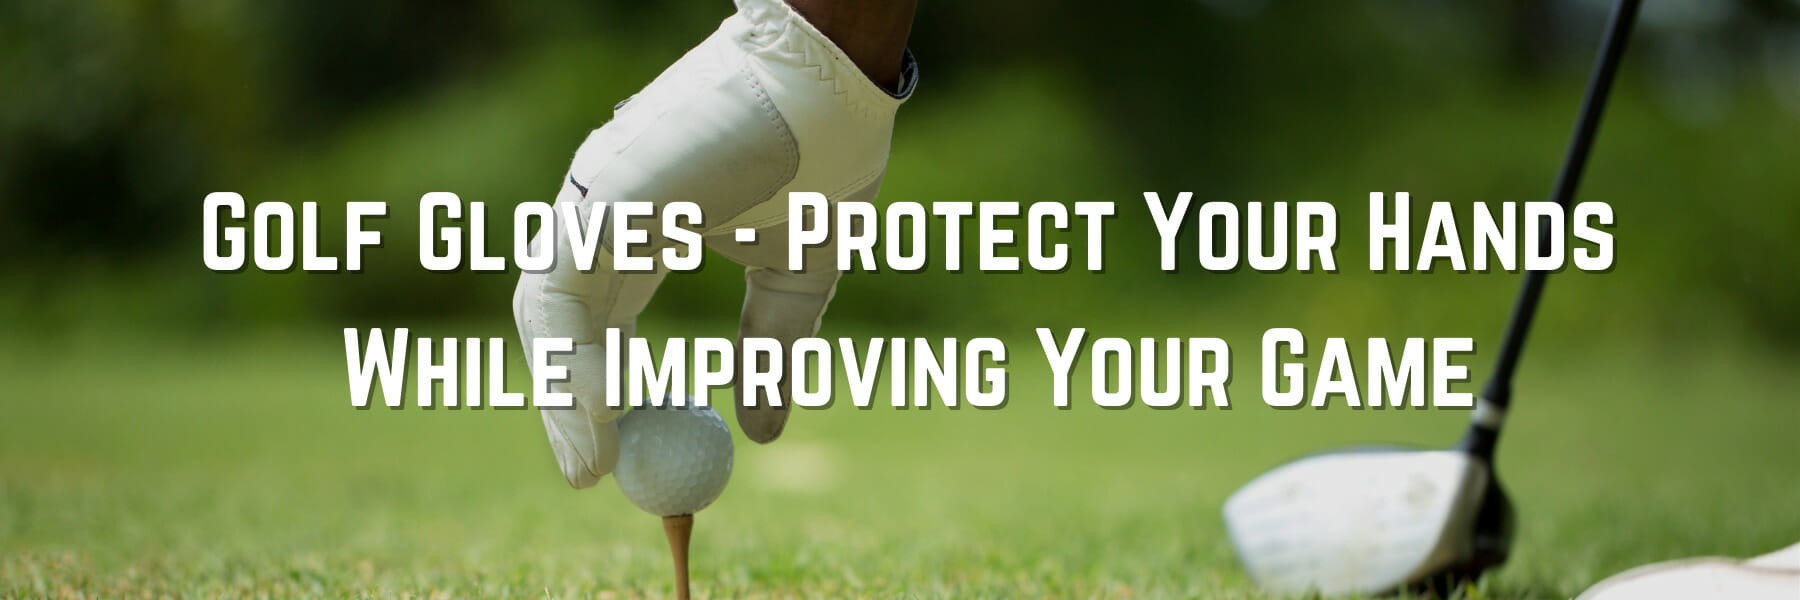 Golf Gloves - Protect Your Hands While Improving Your Game